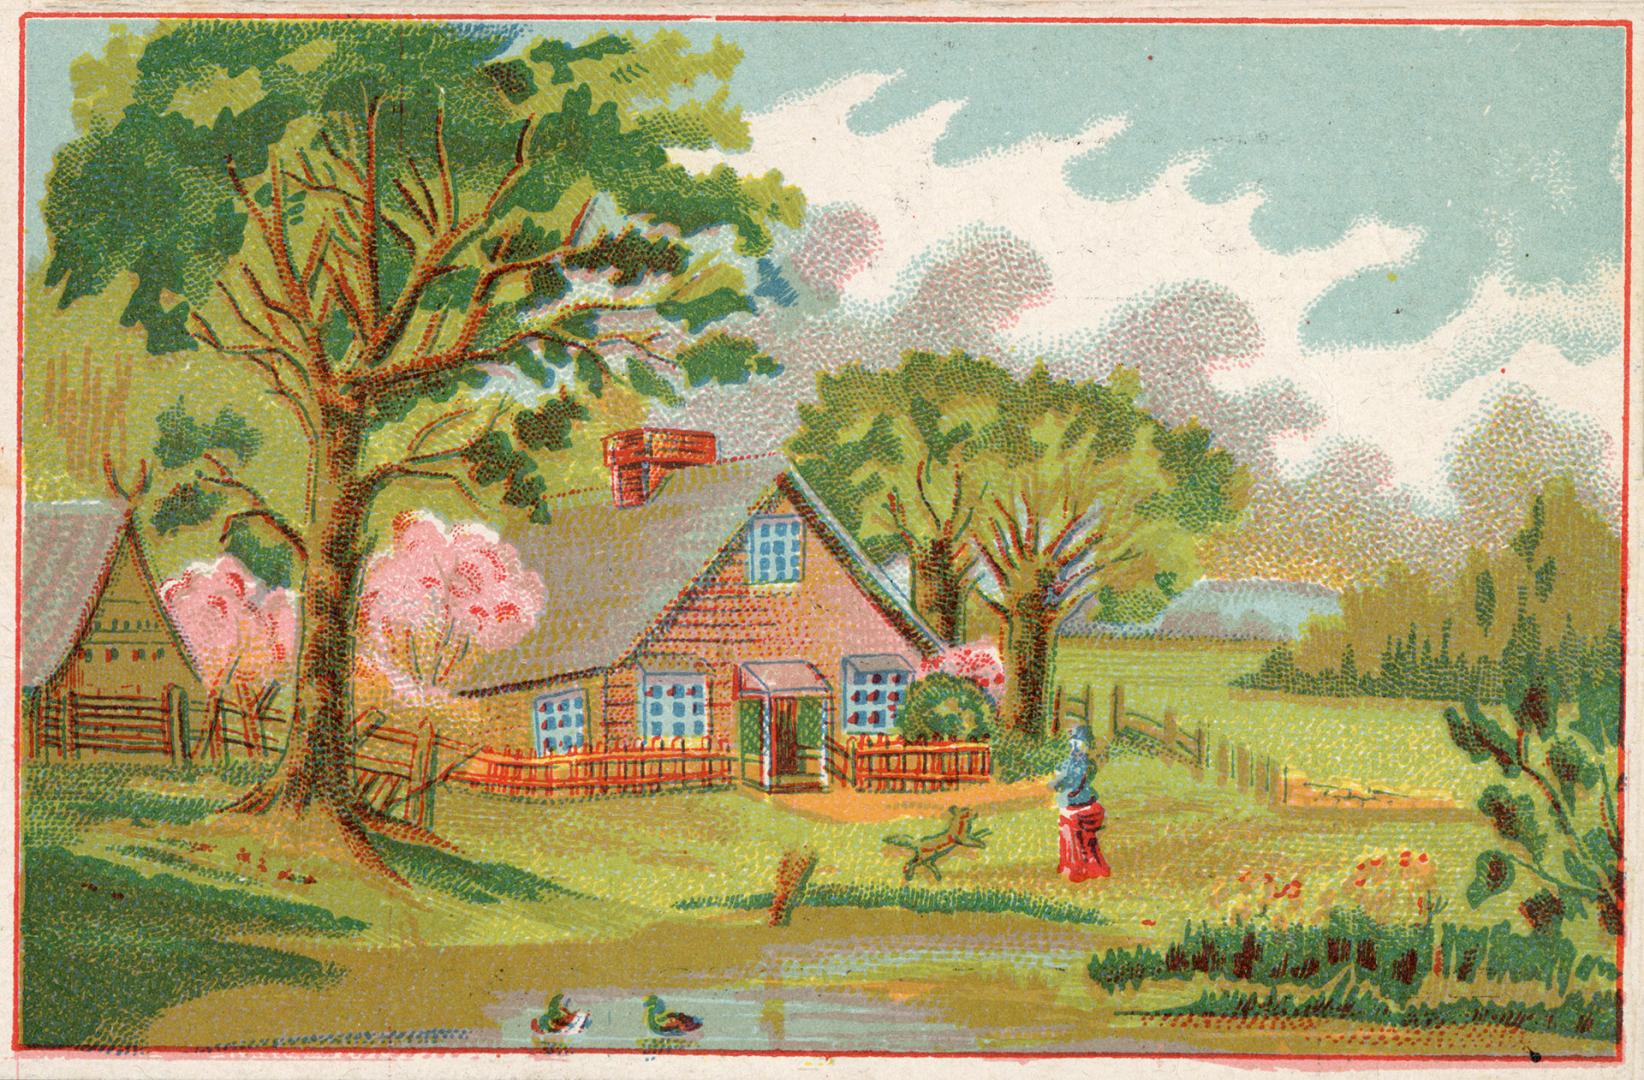 A home in the countryside